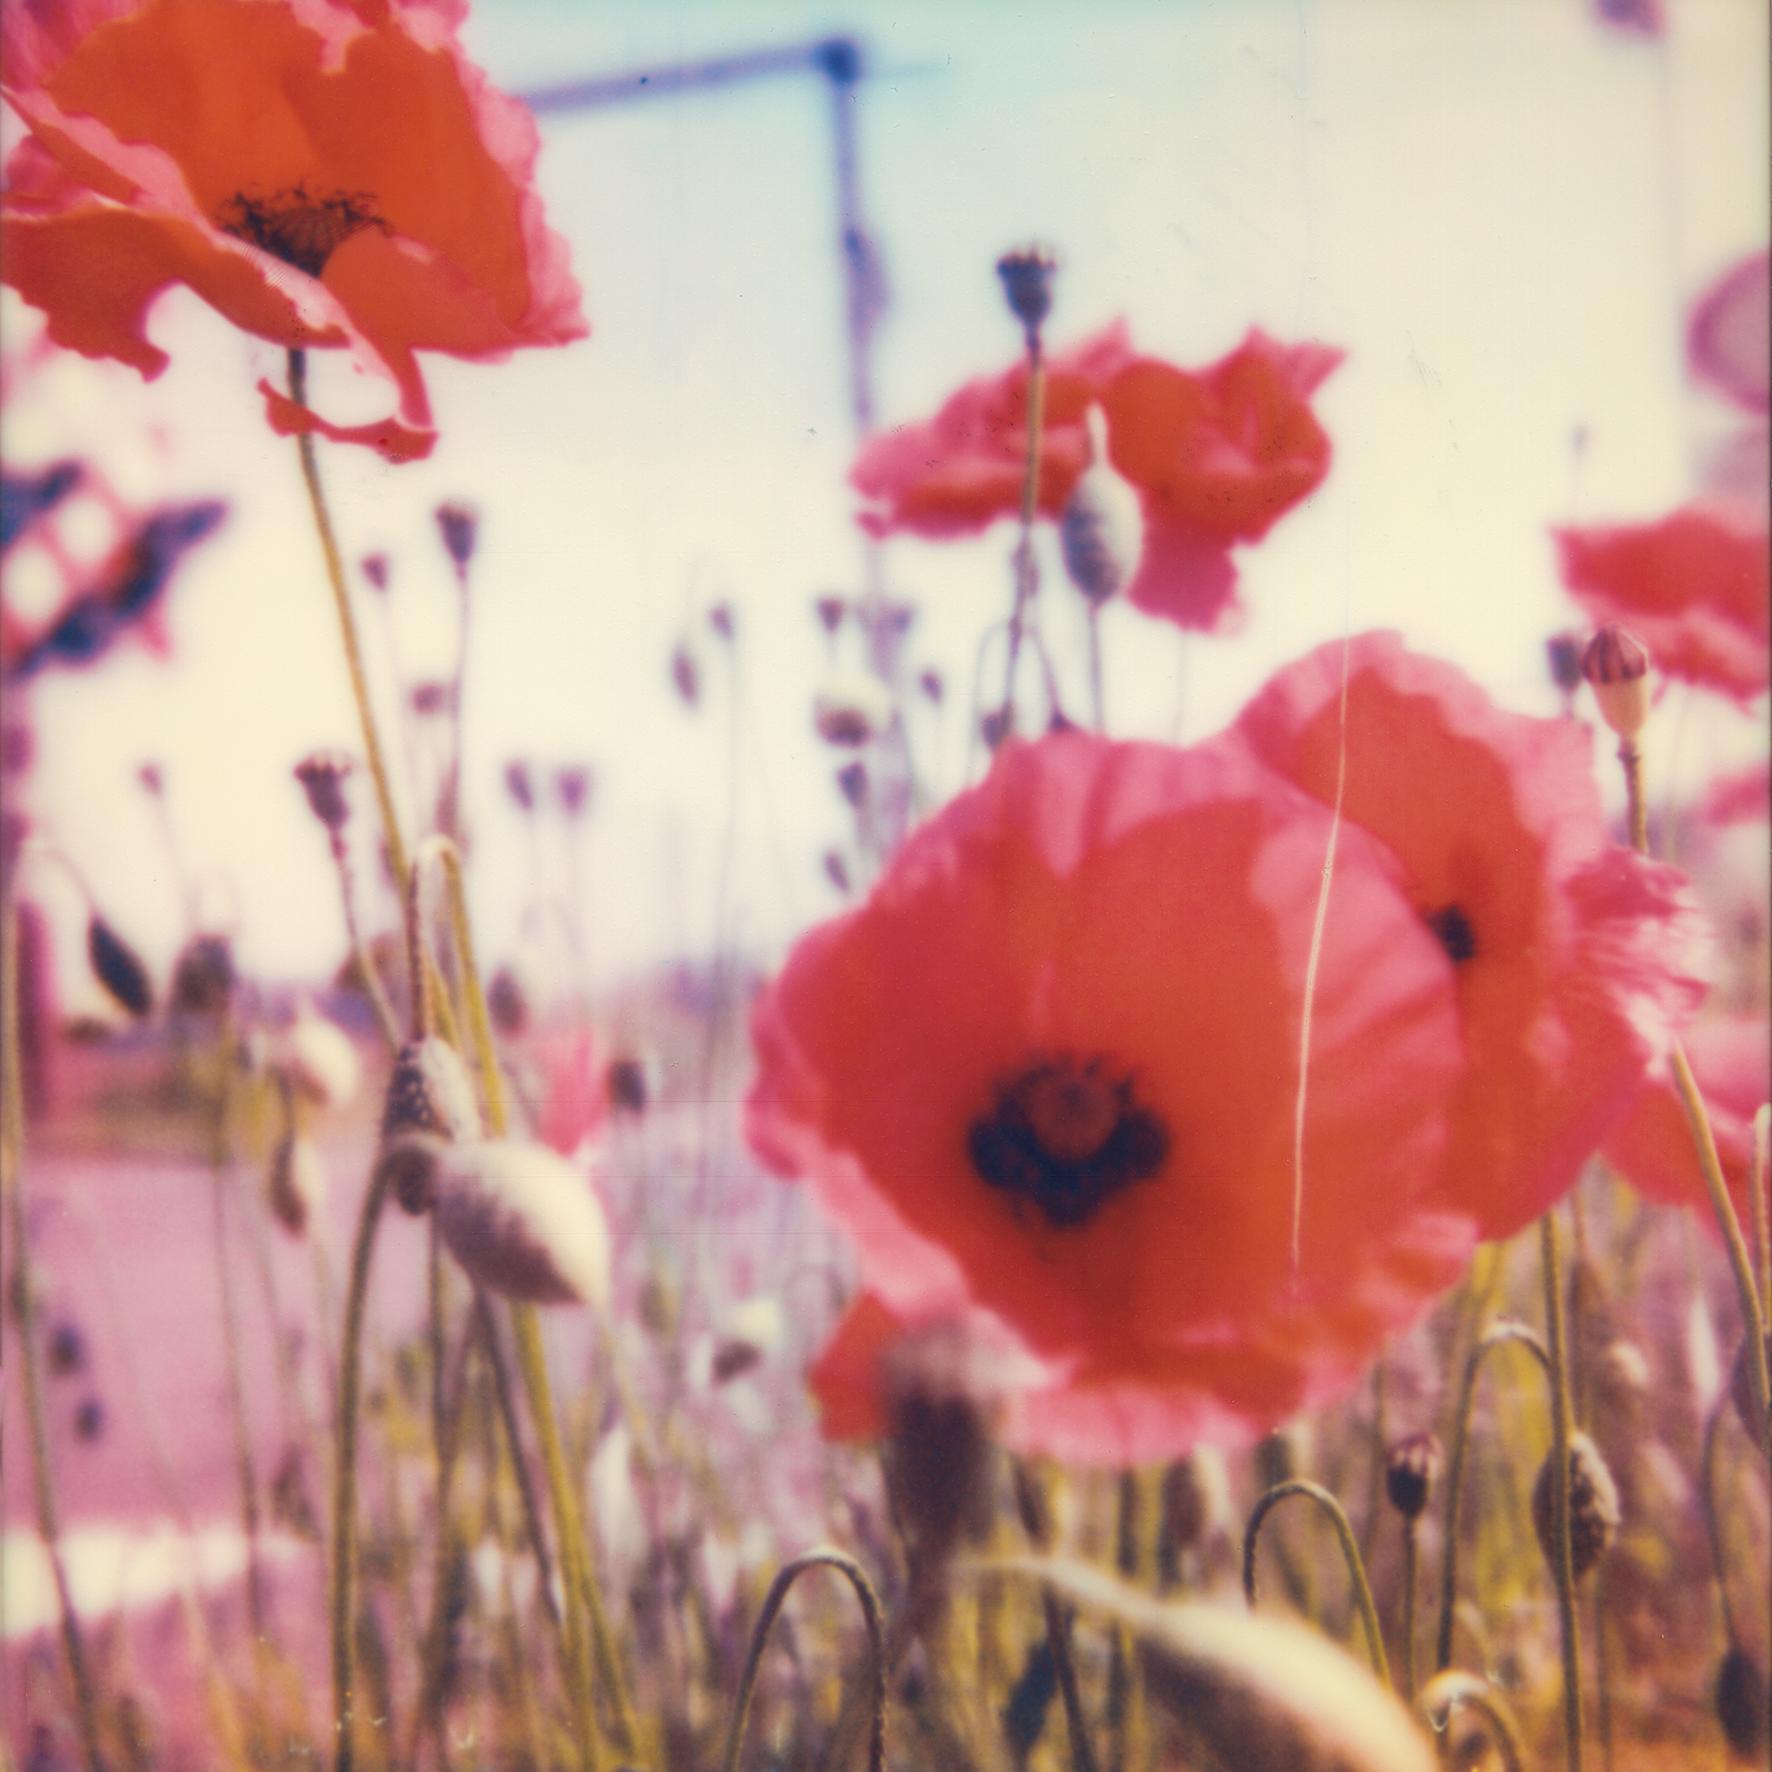 Carmen de Vos Landscape Photograph - Poppy Realm #02 [From the series Wild Things]